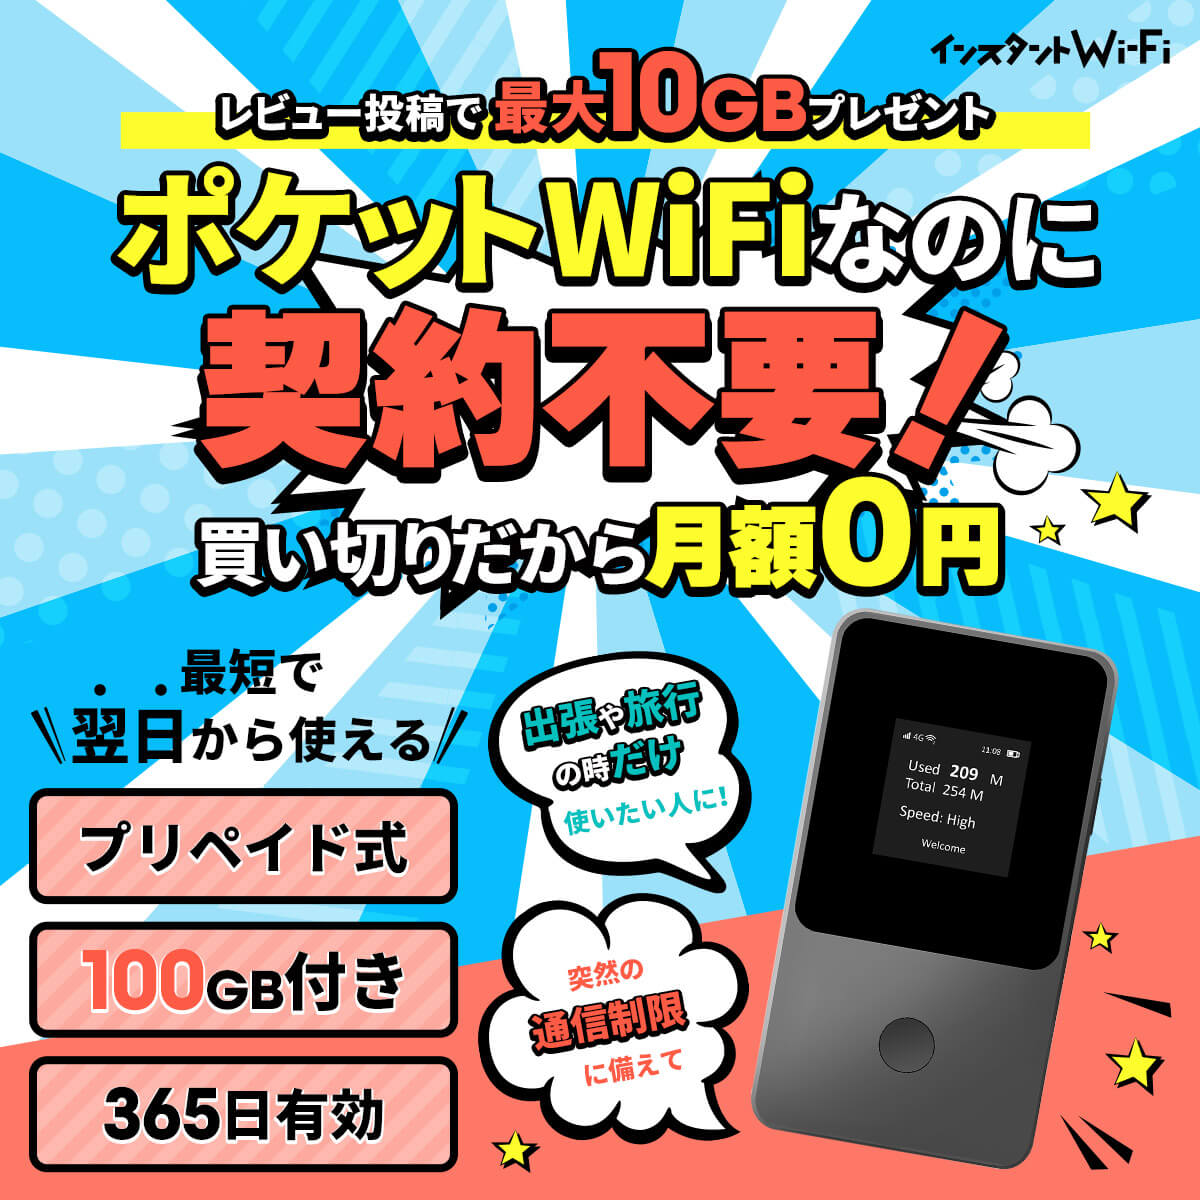  instant Wi-Fi data communication attaching pocket WiFi buying cut .plipeido type mobile router term of validity 365 day Giga addition Charge 100GB plan + addition 5GB present 